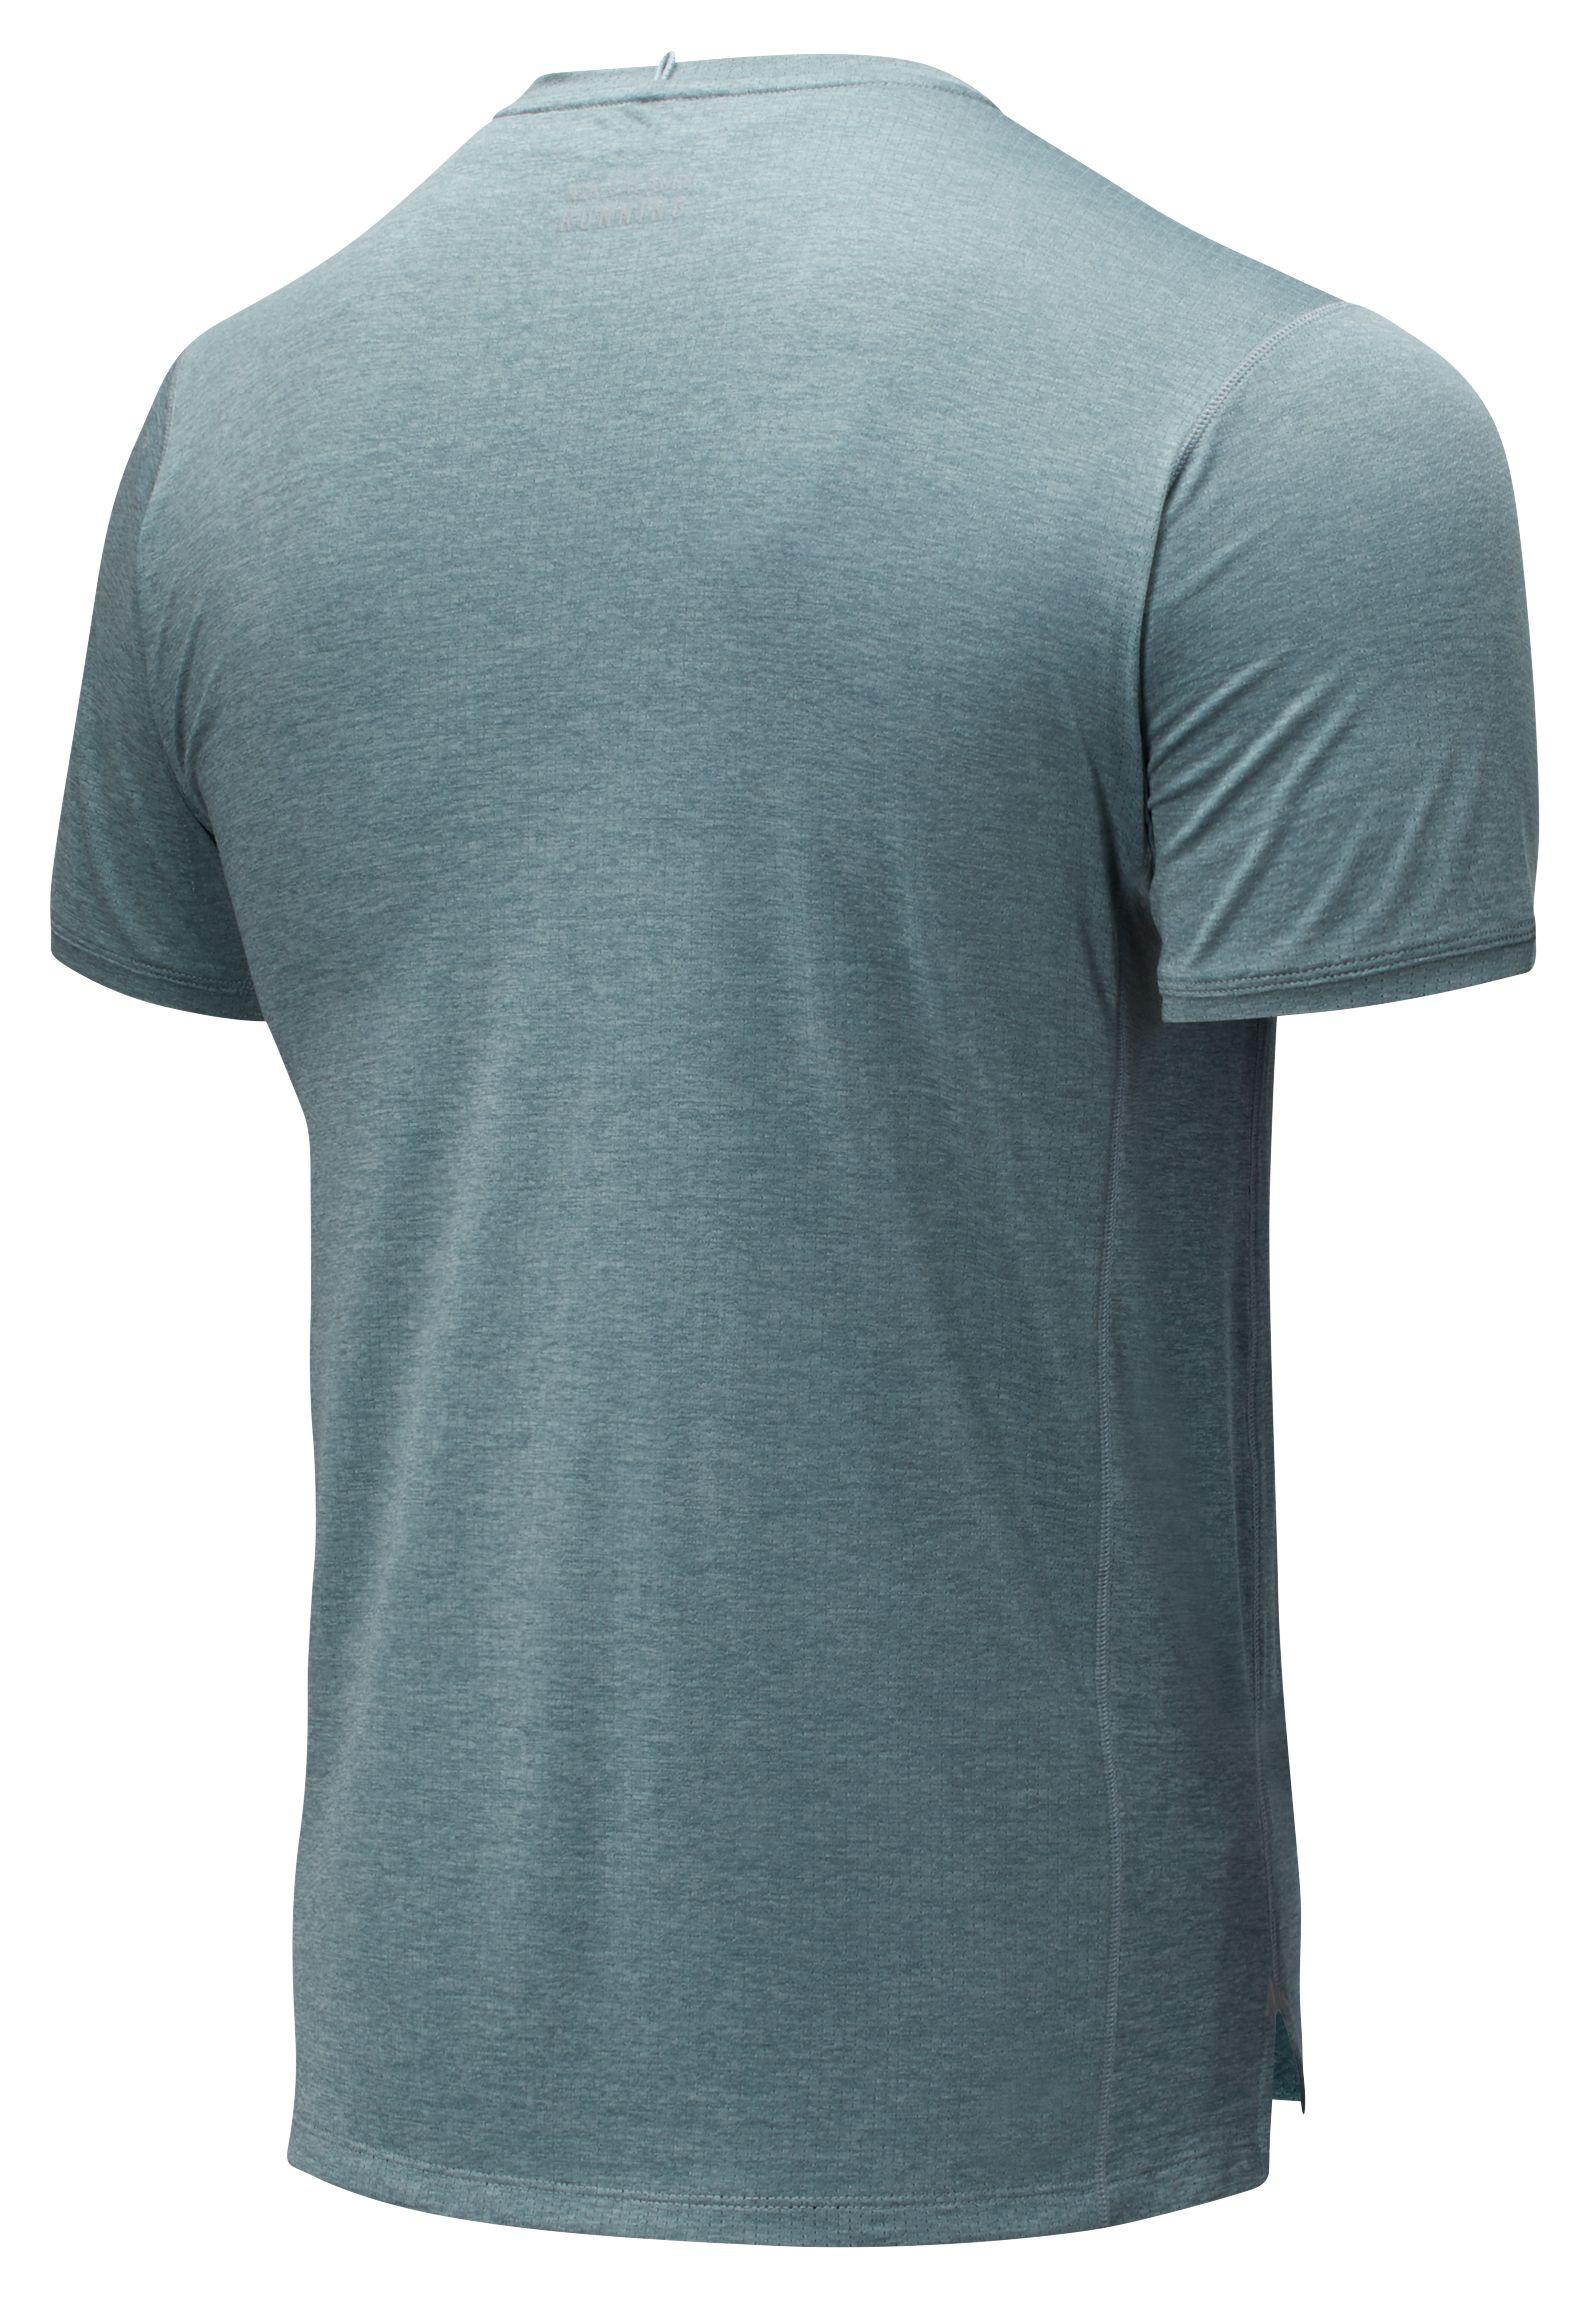 New Balance Synthetic Impact Run Short Sleeve in Grey (Blue) for Men - Lyst